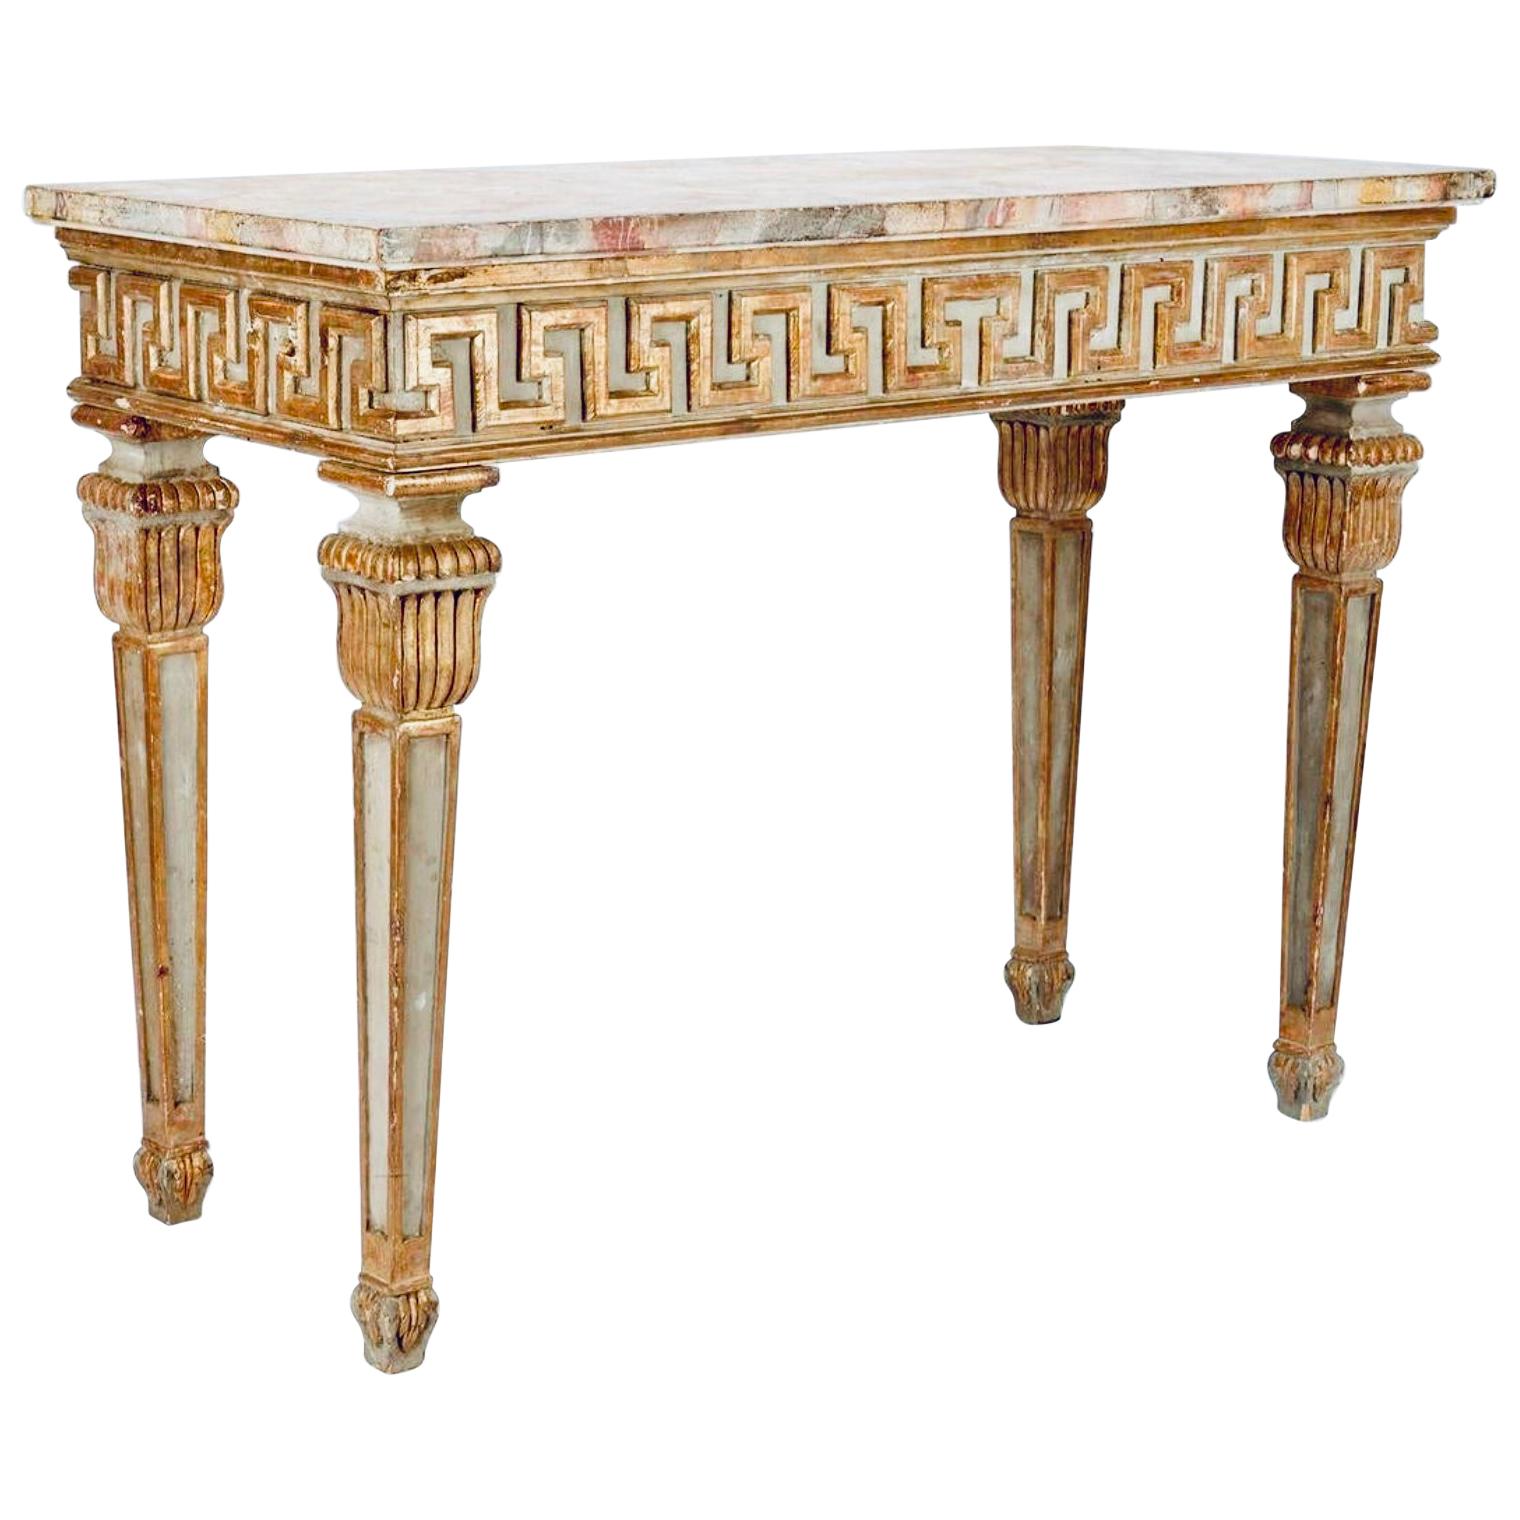 Neoclassical Styled Painted Tall Console Table with Greek Key Decoration